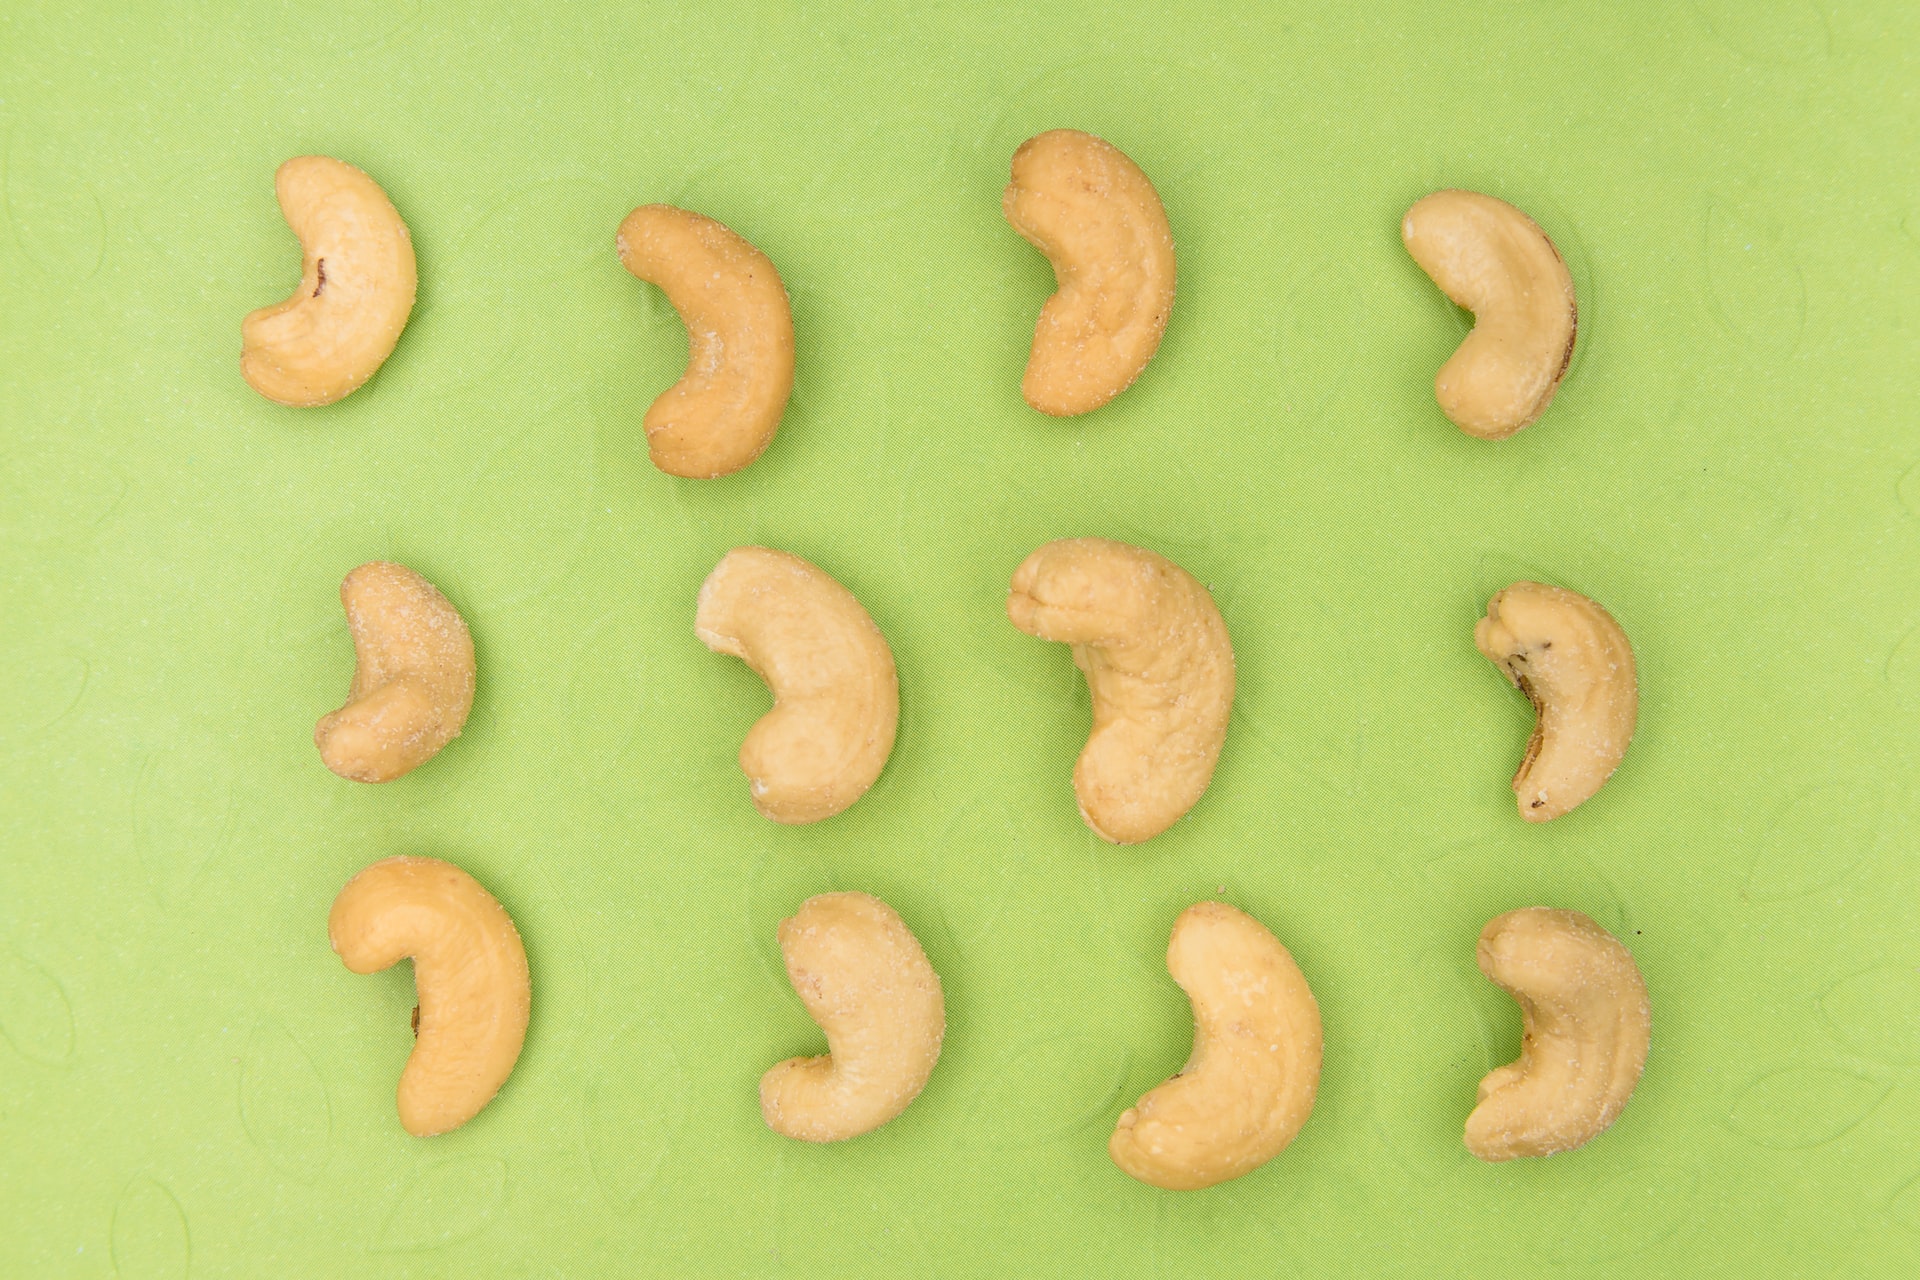 Health Benefits Of Cashews: 4 Things You Might Not Know